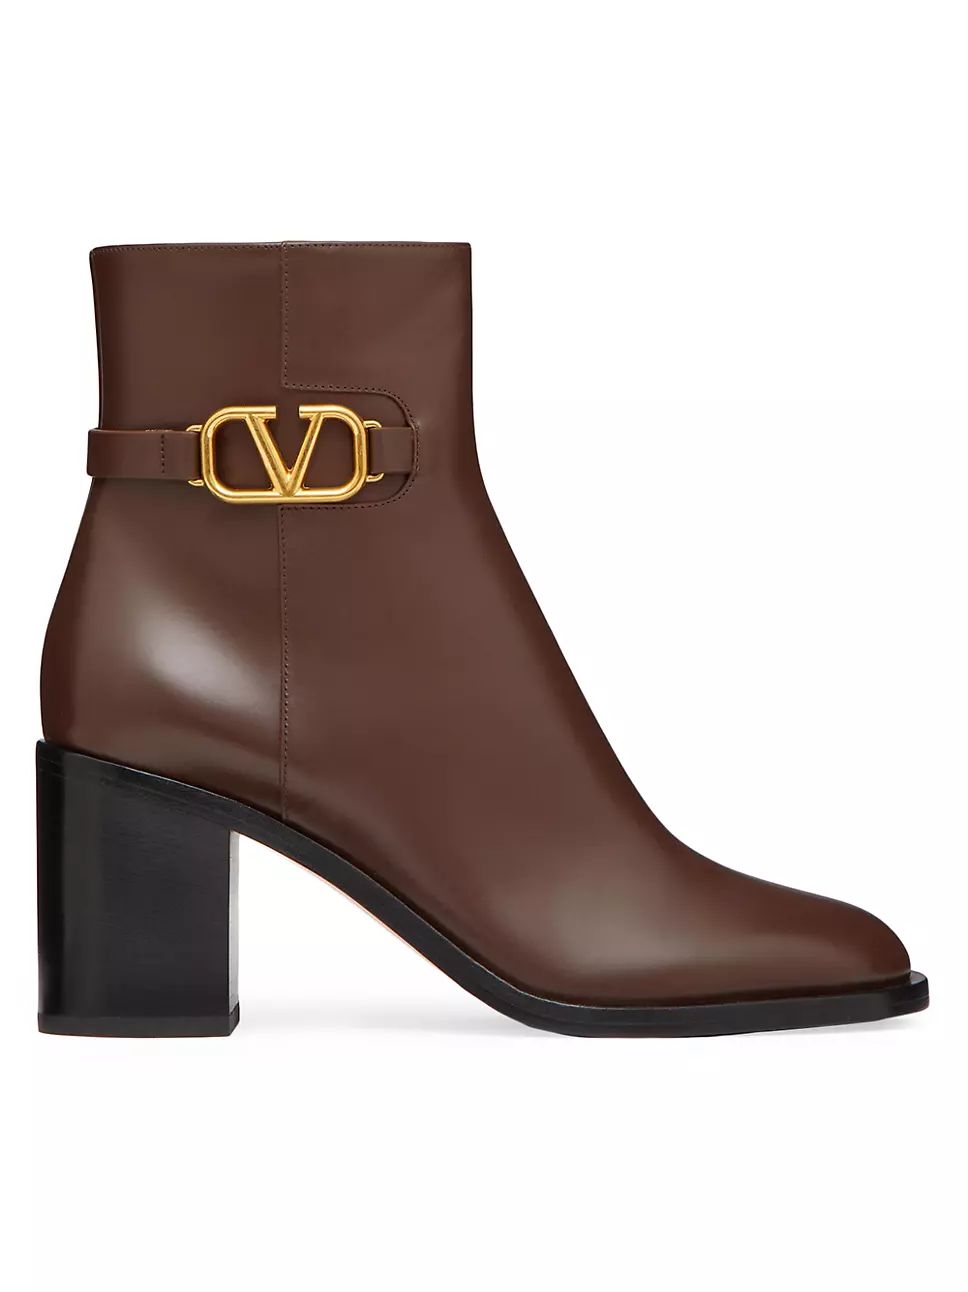 Vlogo Signature Calfskin Ankle Boots | Saks Fifth Avenue